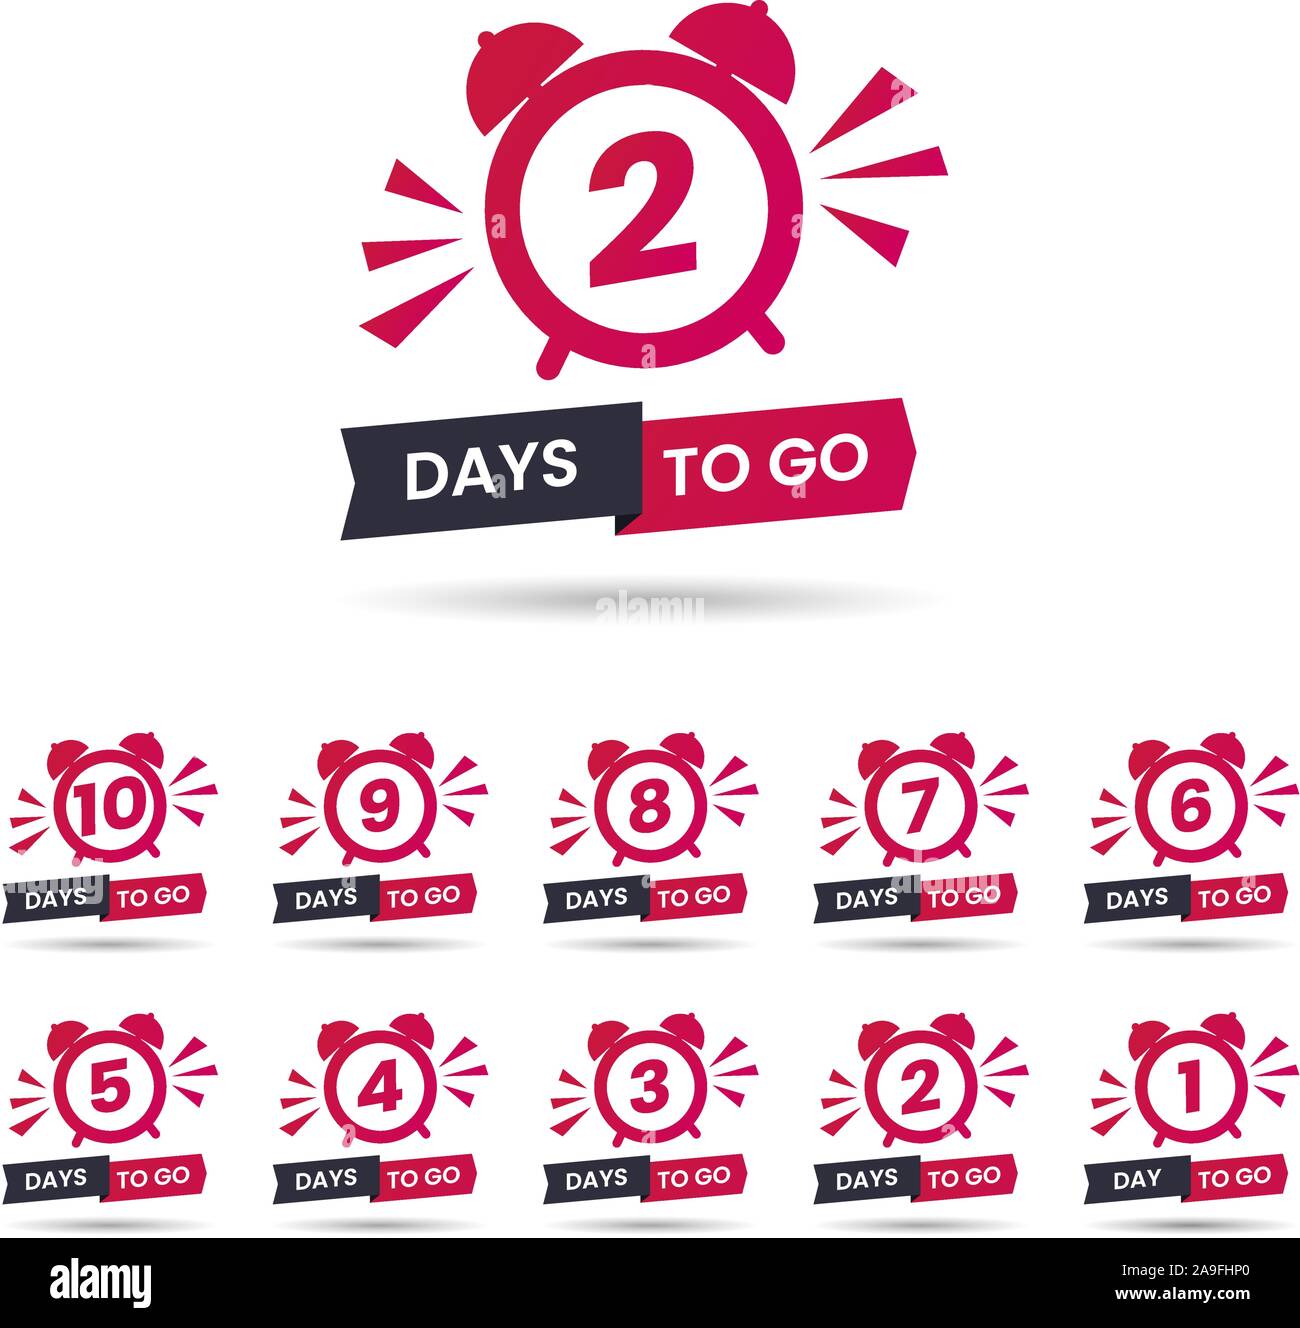 Set of red promo offer. Sale banner with countdown clock and text - 1 2 3 4 5 6 7 8 9 10 days to go. Sale tag with days to go words. Flat vector illus Stock Vector